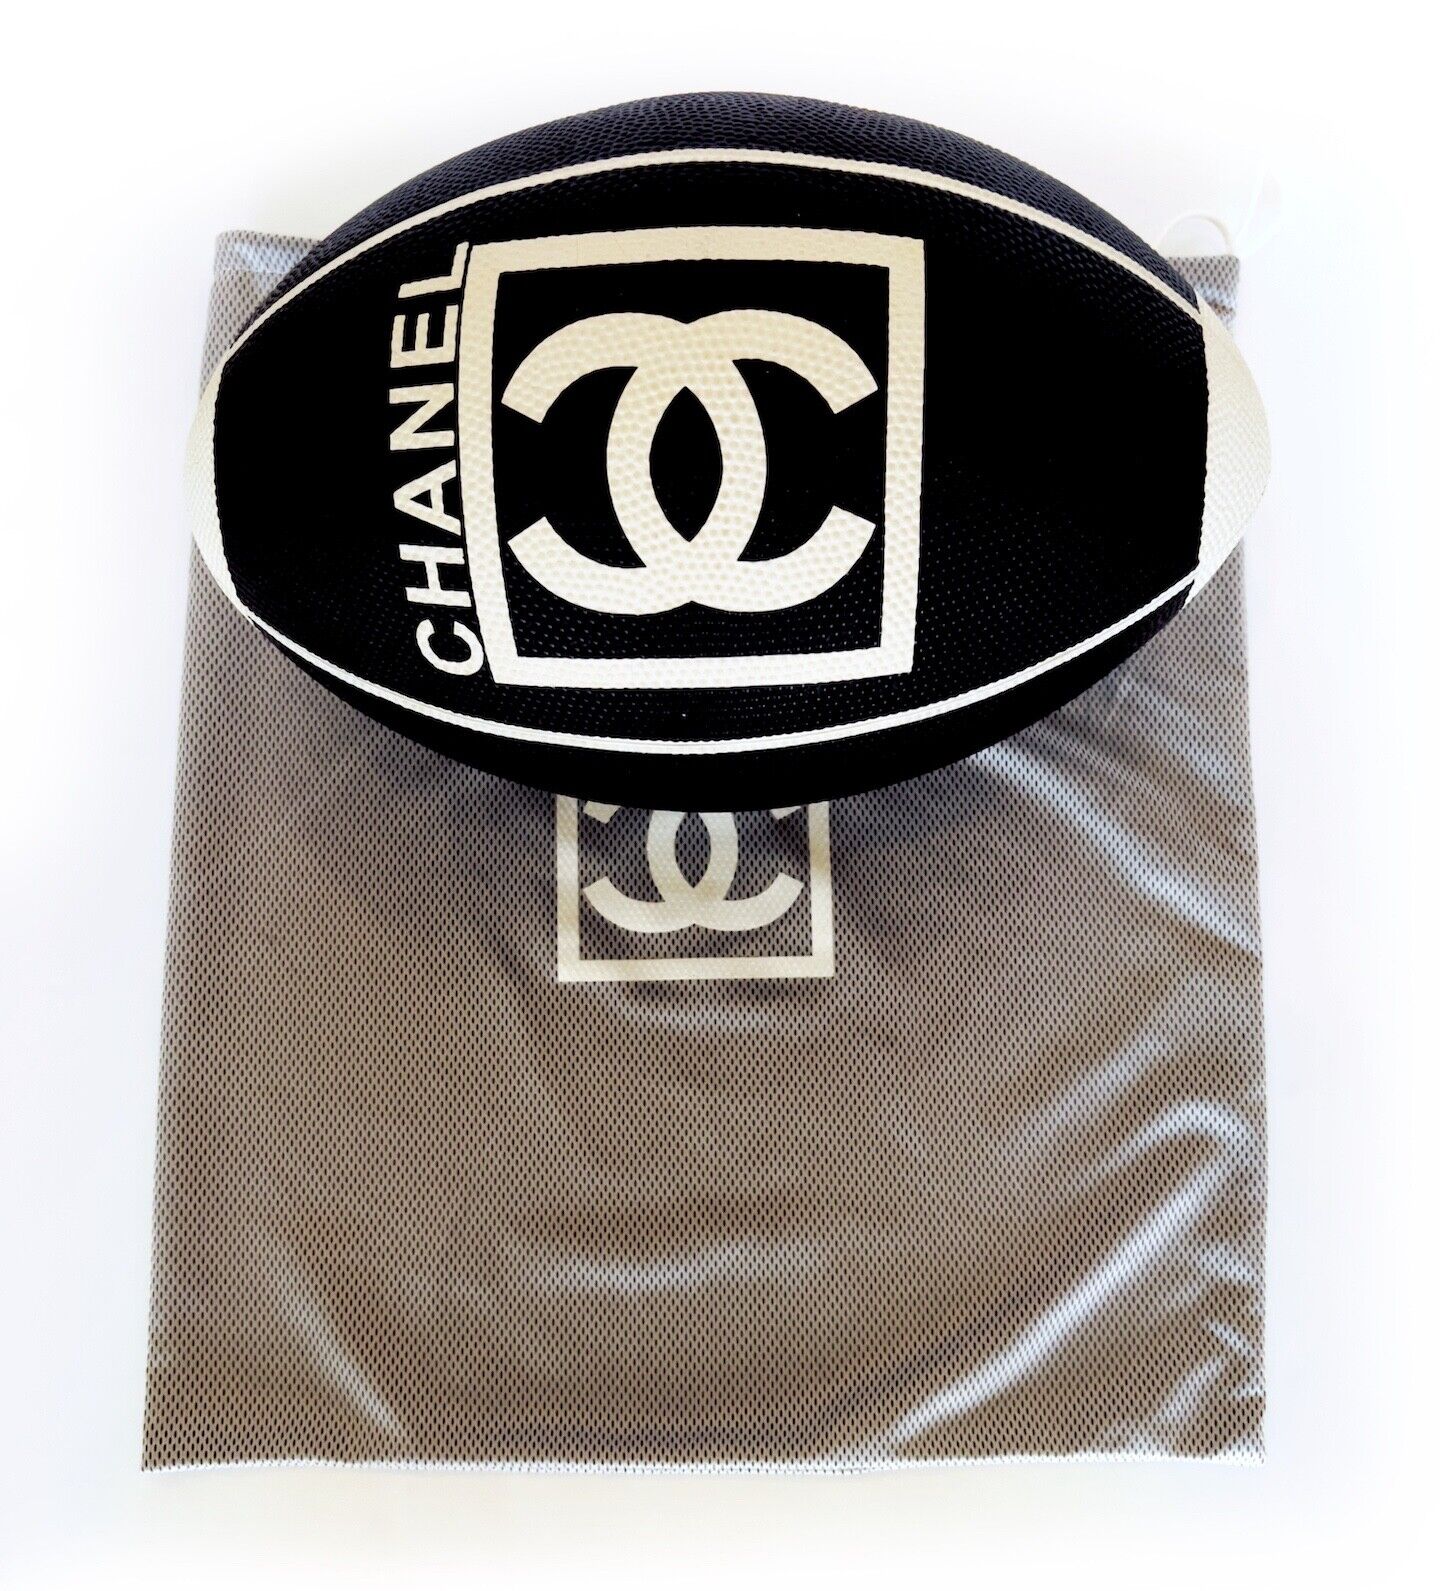 Authentic Chanel rugby ball, circa 2007, in mint condition with bag